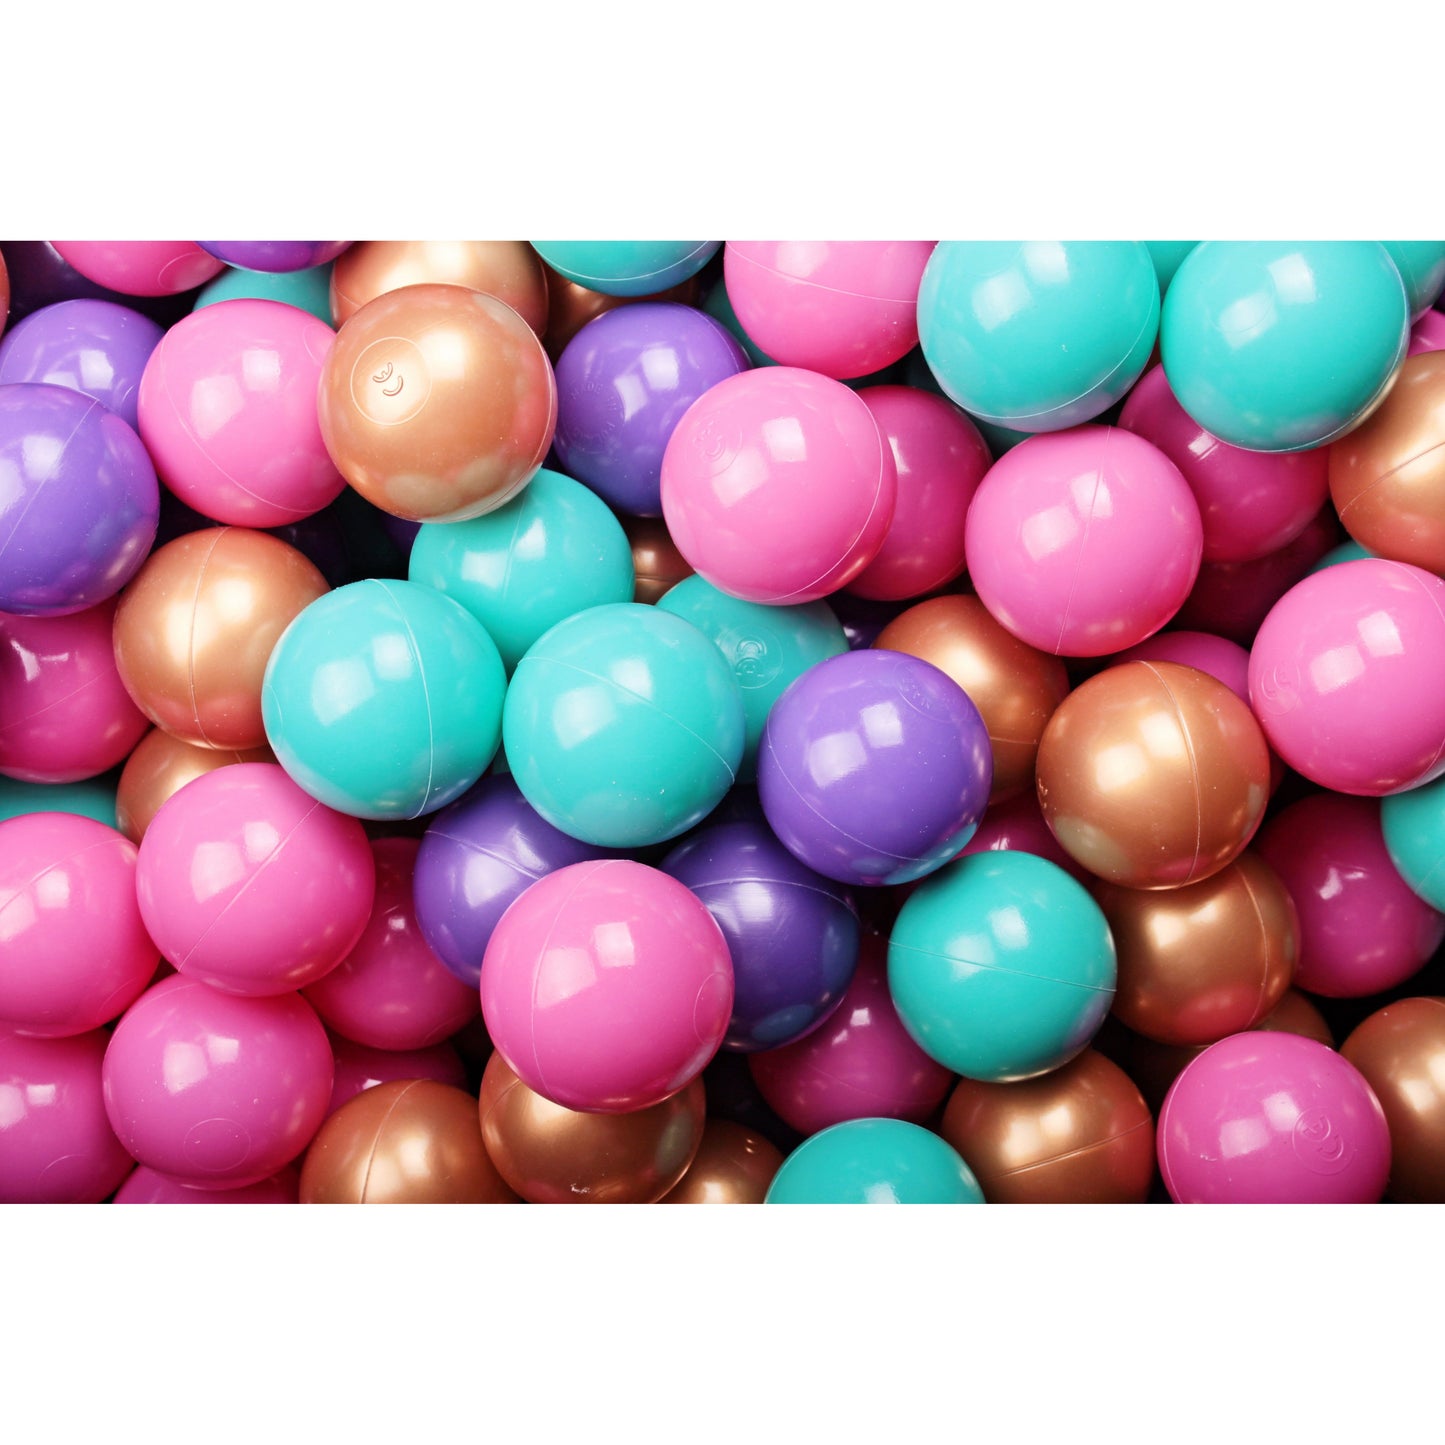 Velvet Corduroy Chocolate Round Foam Ball Pit - Select Your Own Balls